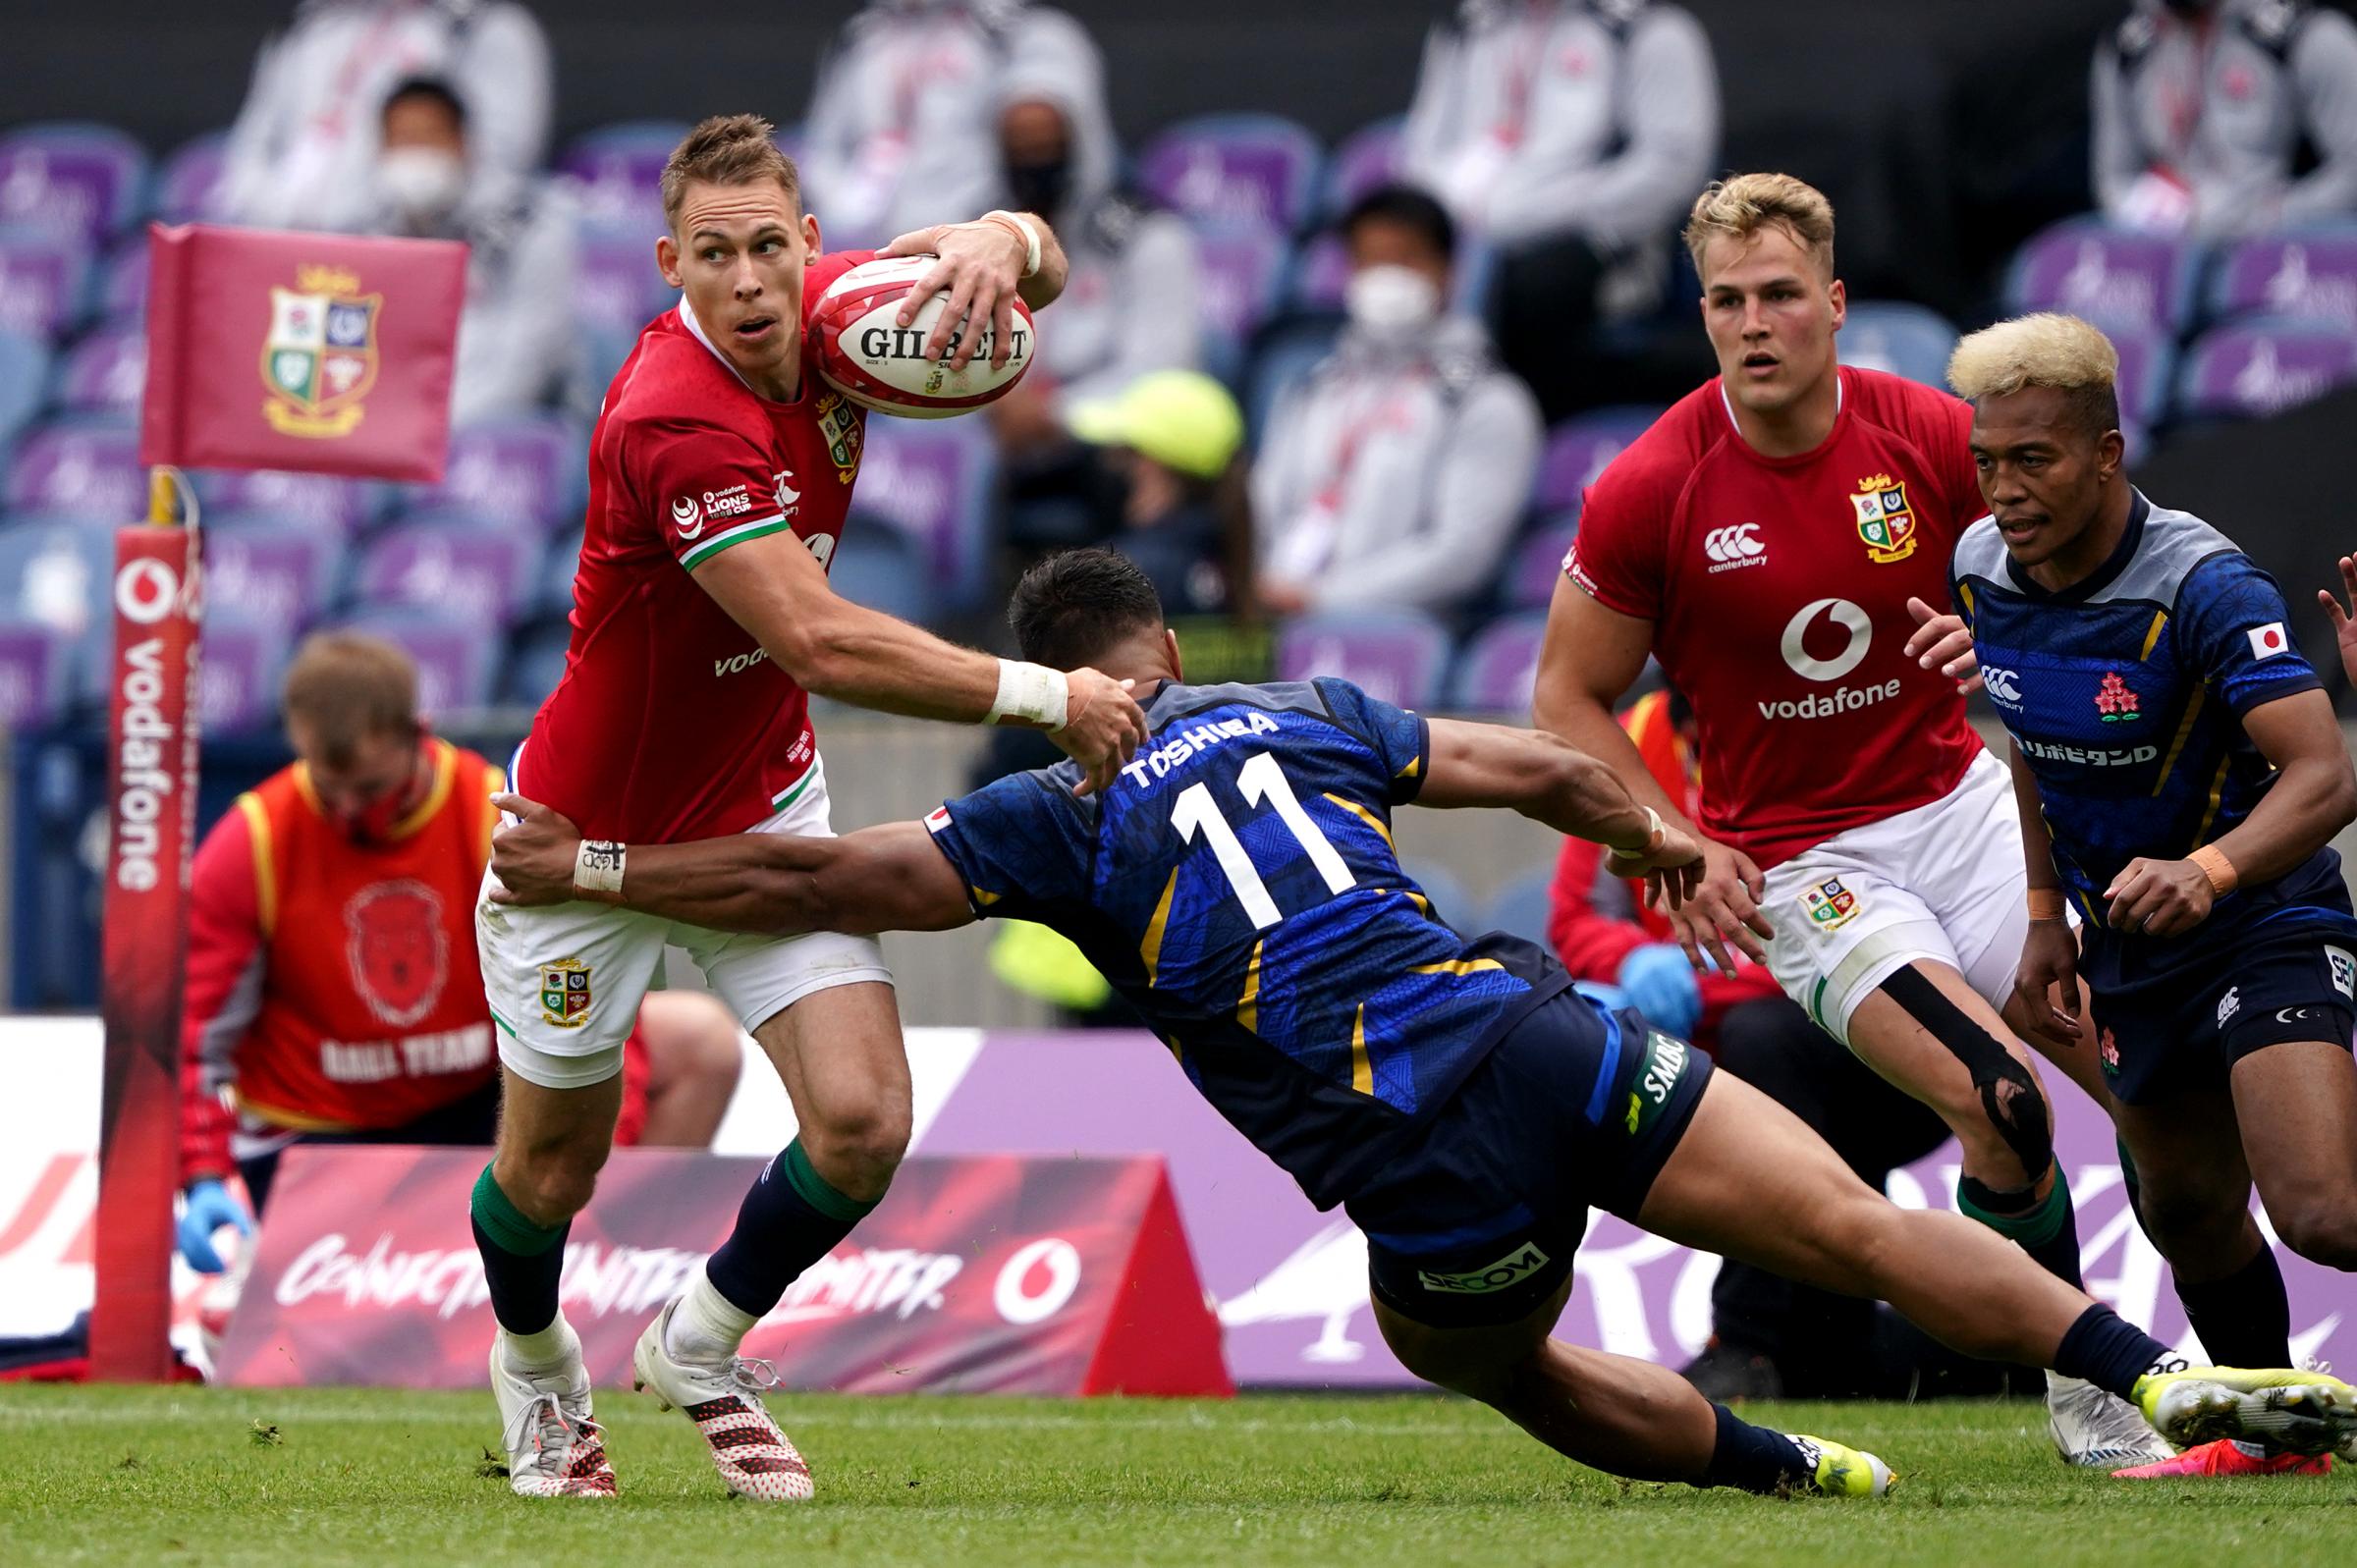 SWITCH: Liam Williams is leaving the Scarlets for Cardiff